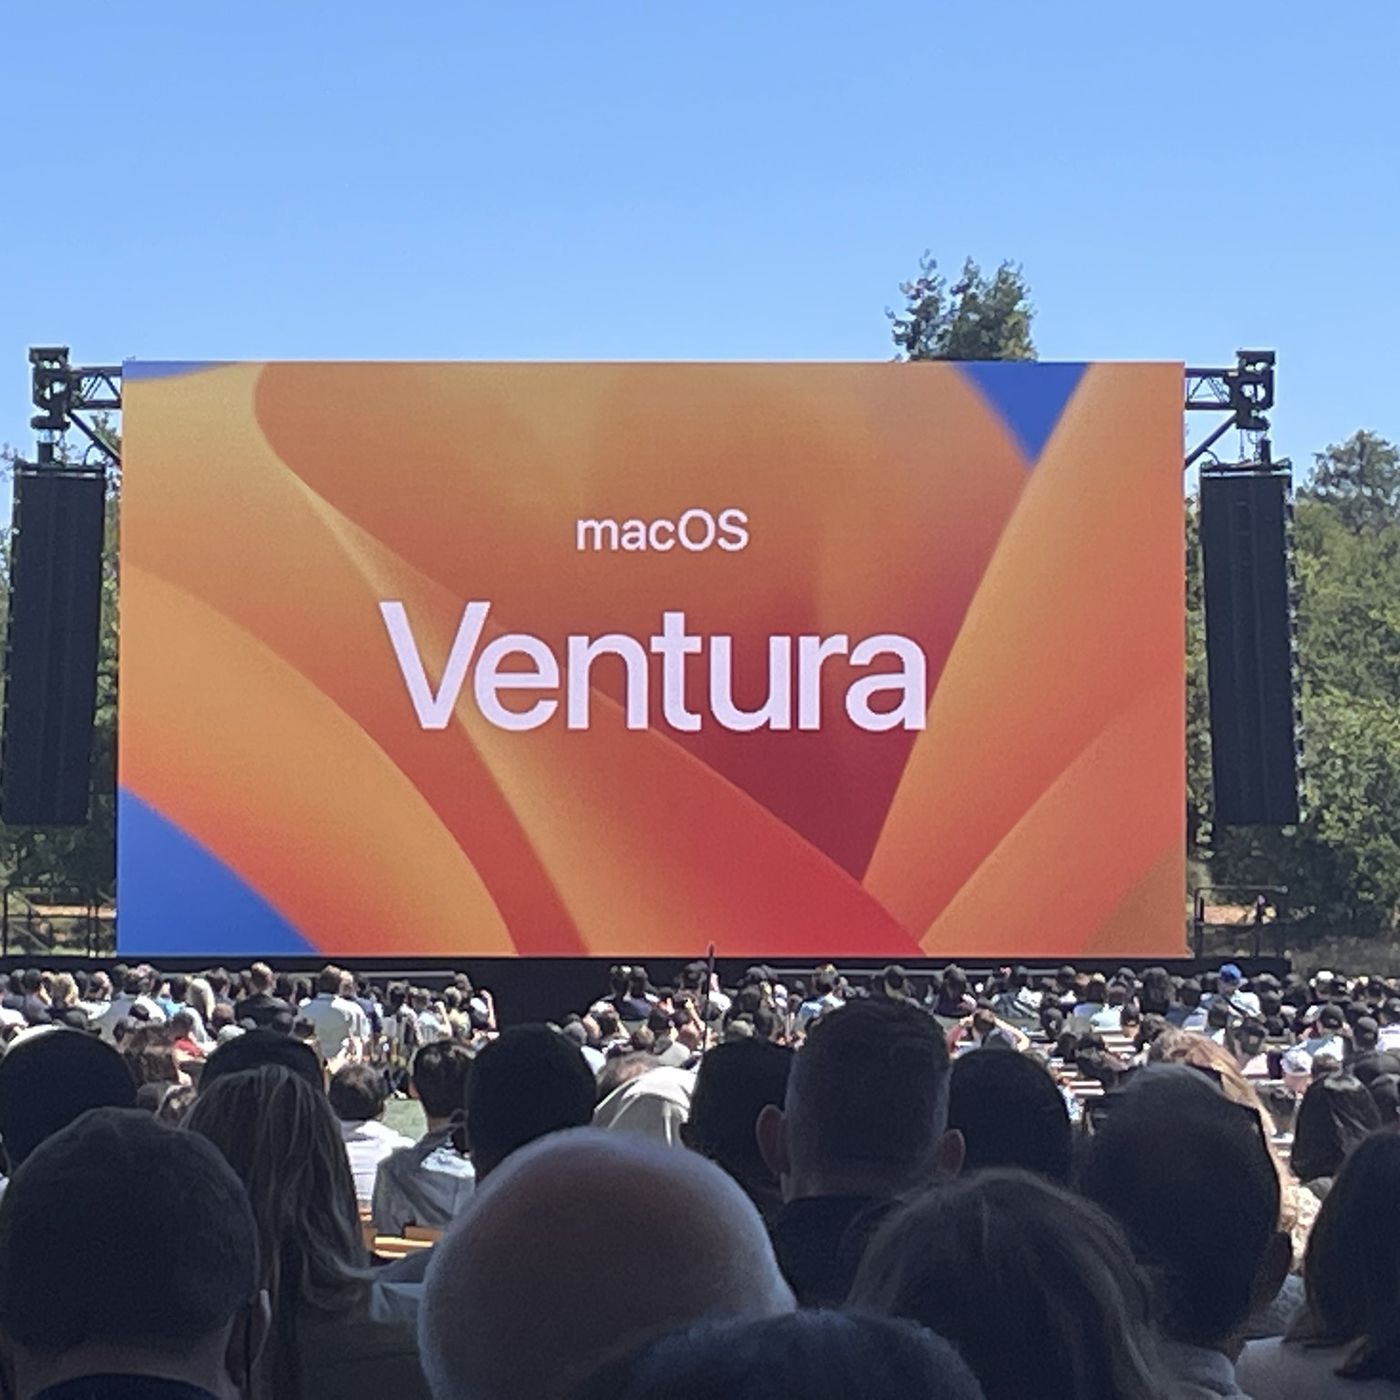 Apple's macOS 13 Ventura with new Stage Manager tool announced at WWDC